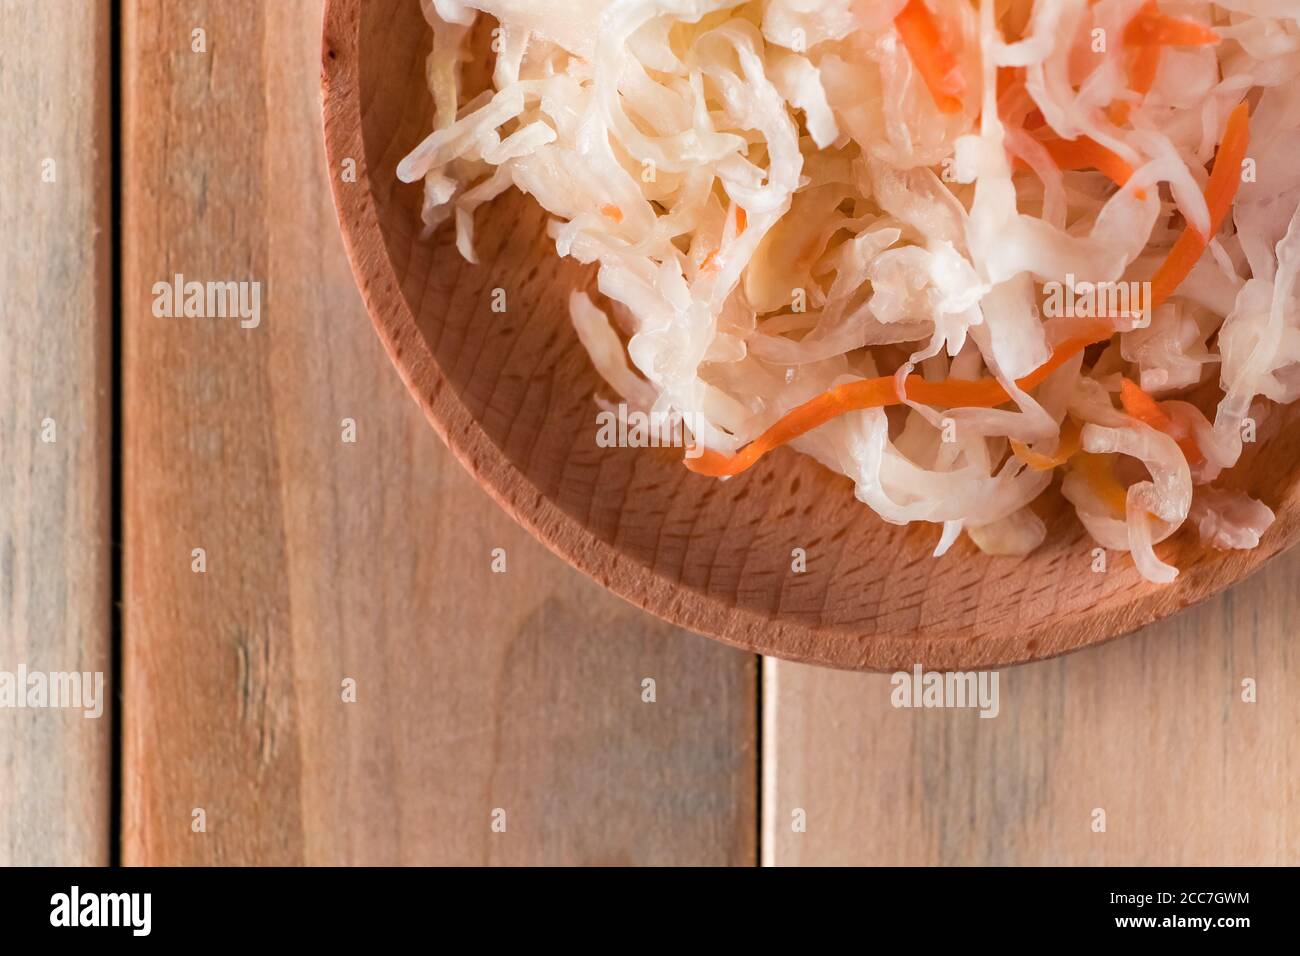 Homemade sauerkraut on a wooden plate. Fermented cabbage with carrot on a light background. Eco food, the trend of healthy eating. Place for your text Stock Photo